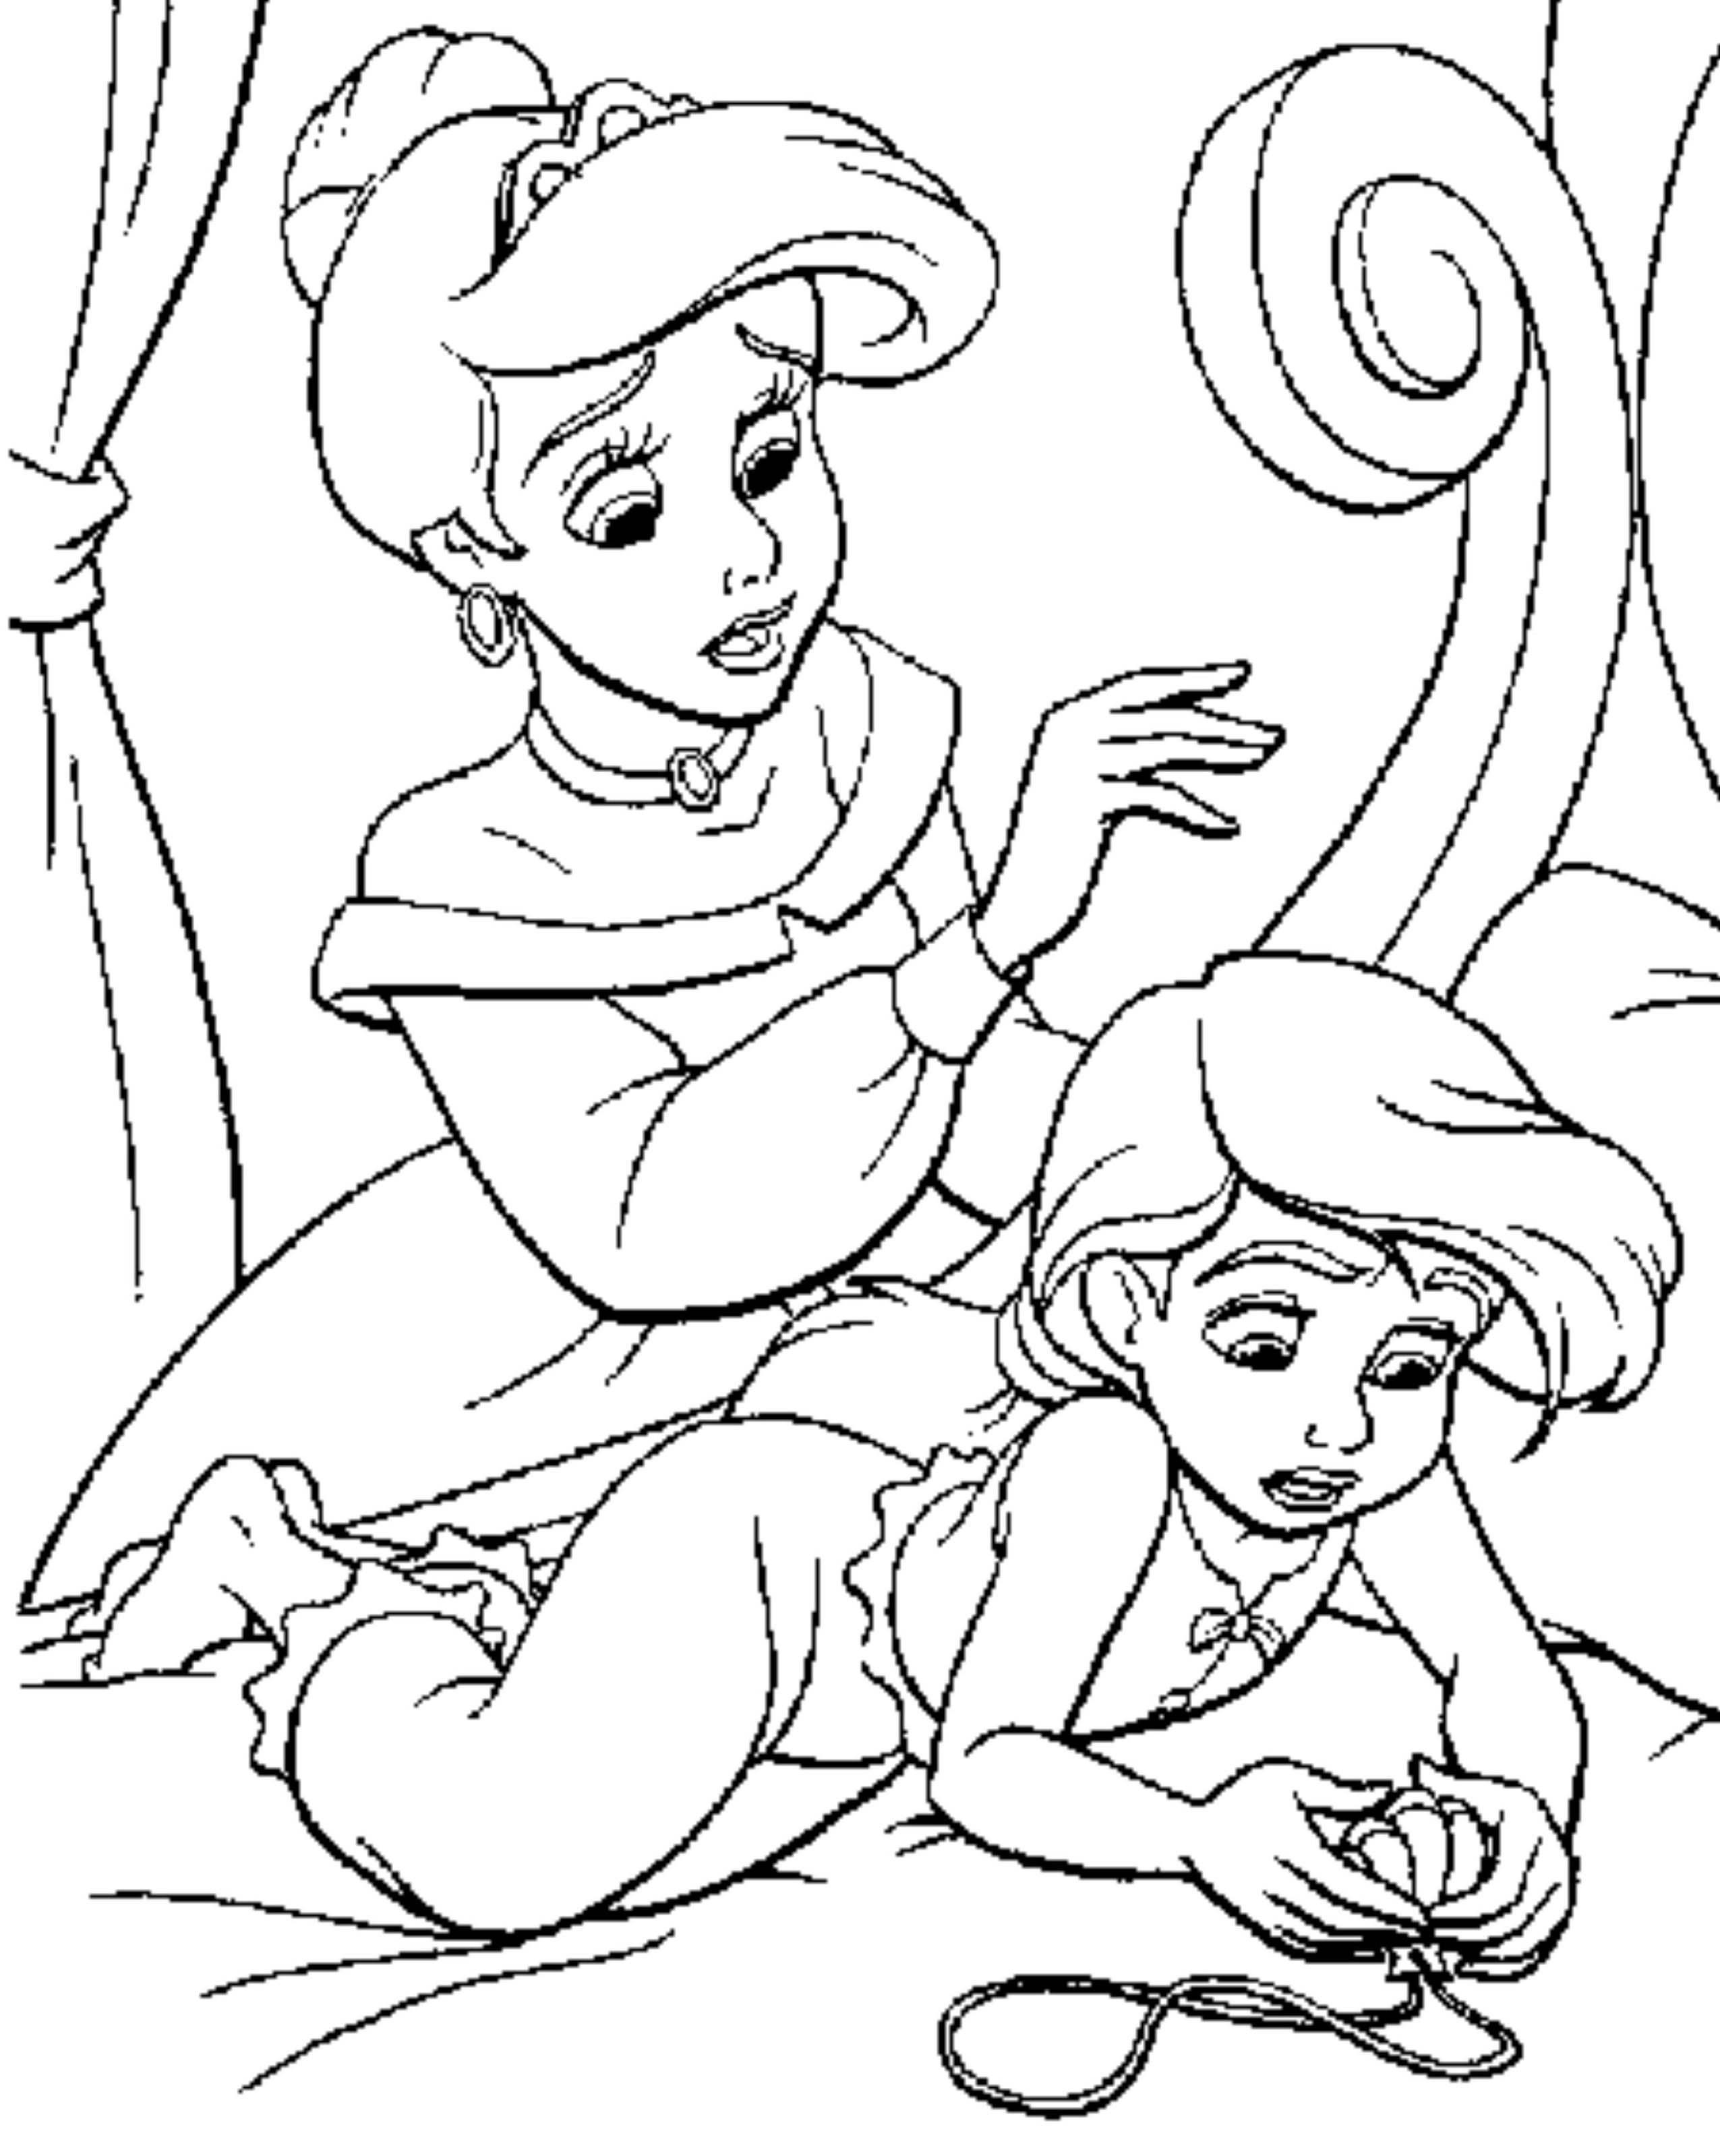 Ariel Coloring Pages To Print at GetDrawings | Free download